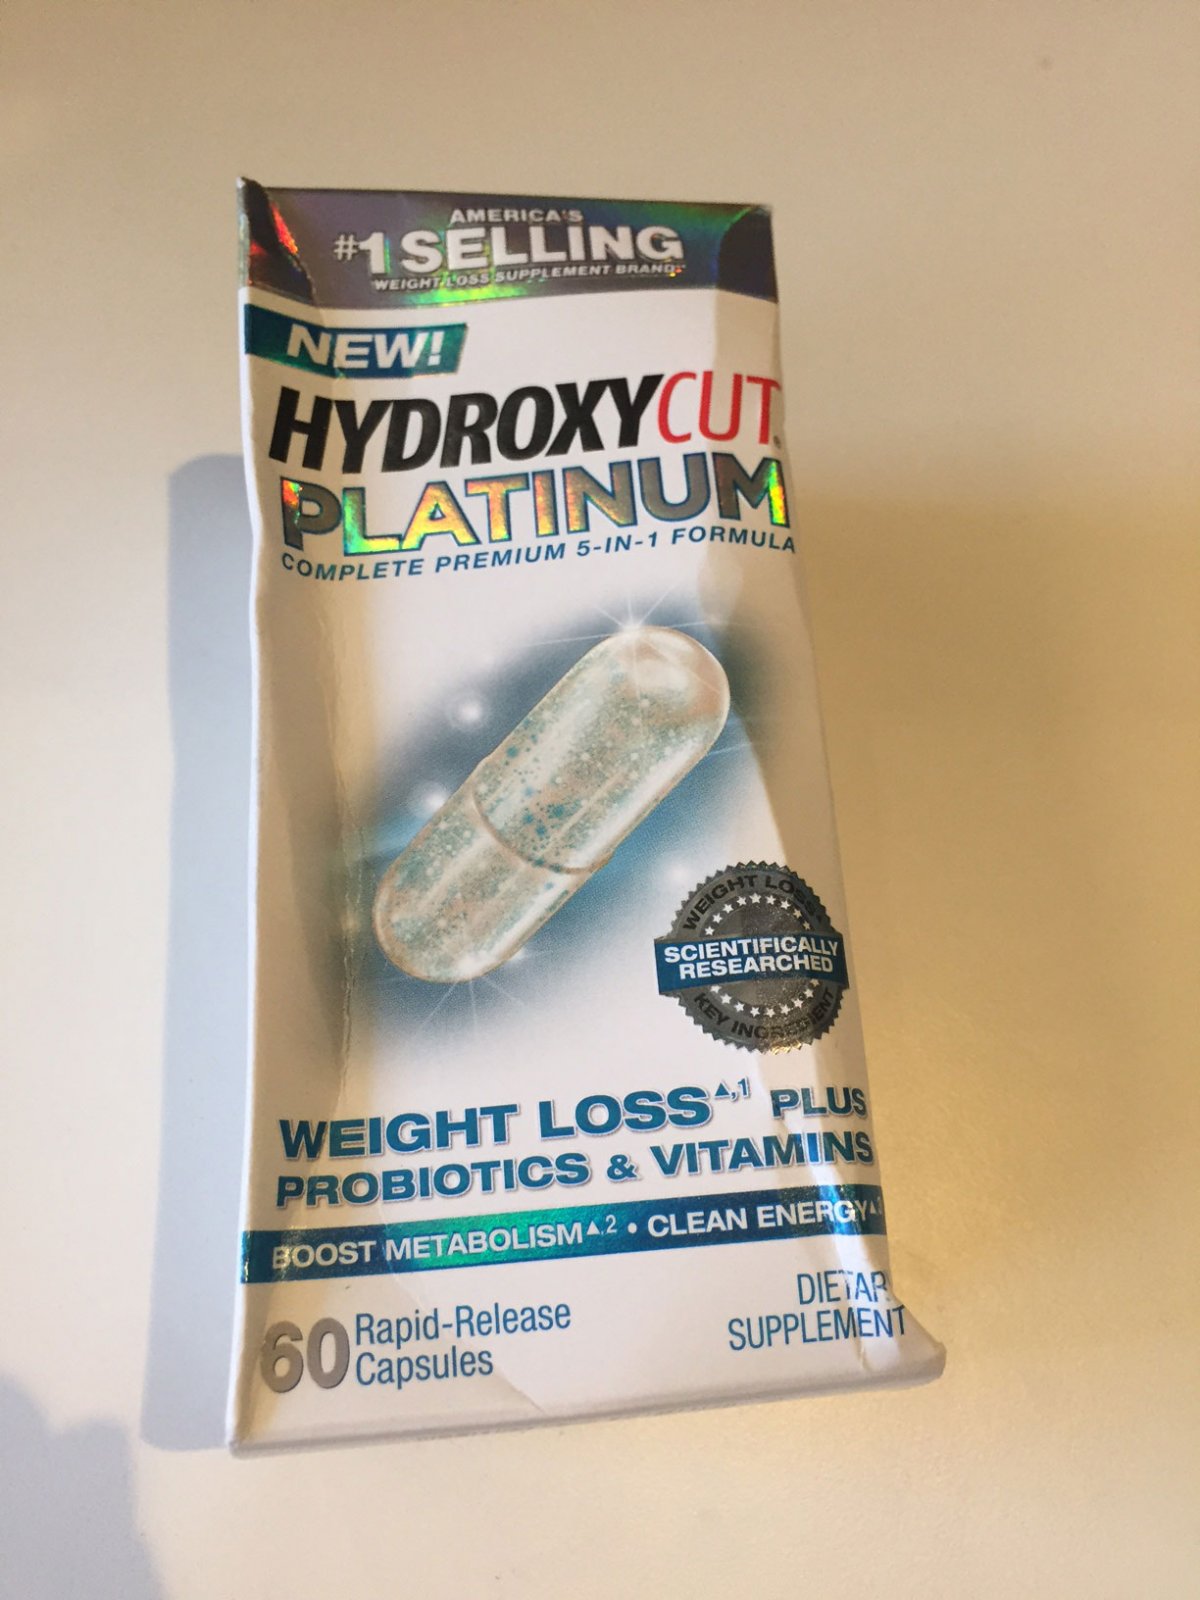 hydroxycut-supplements-are-supposed-to-promote-weight-loss